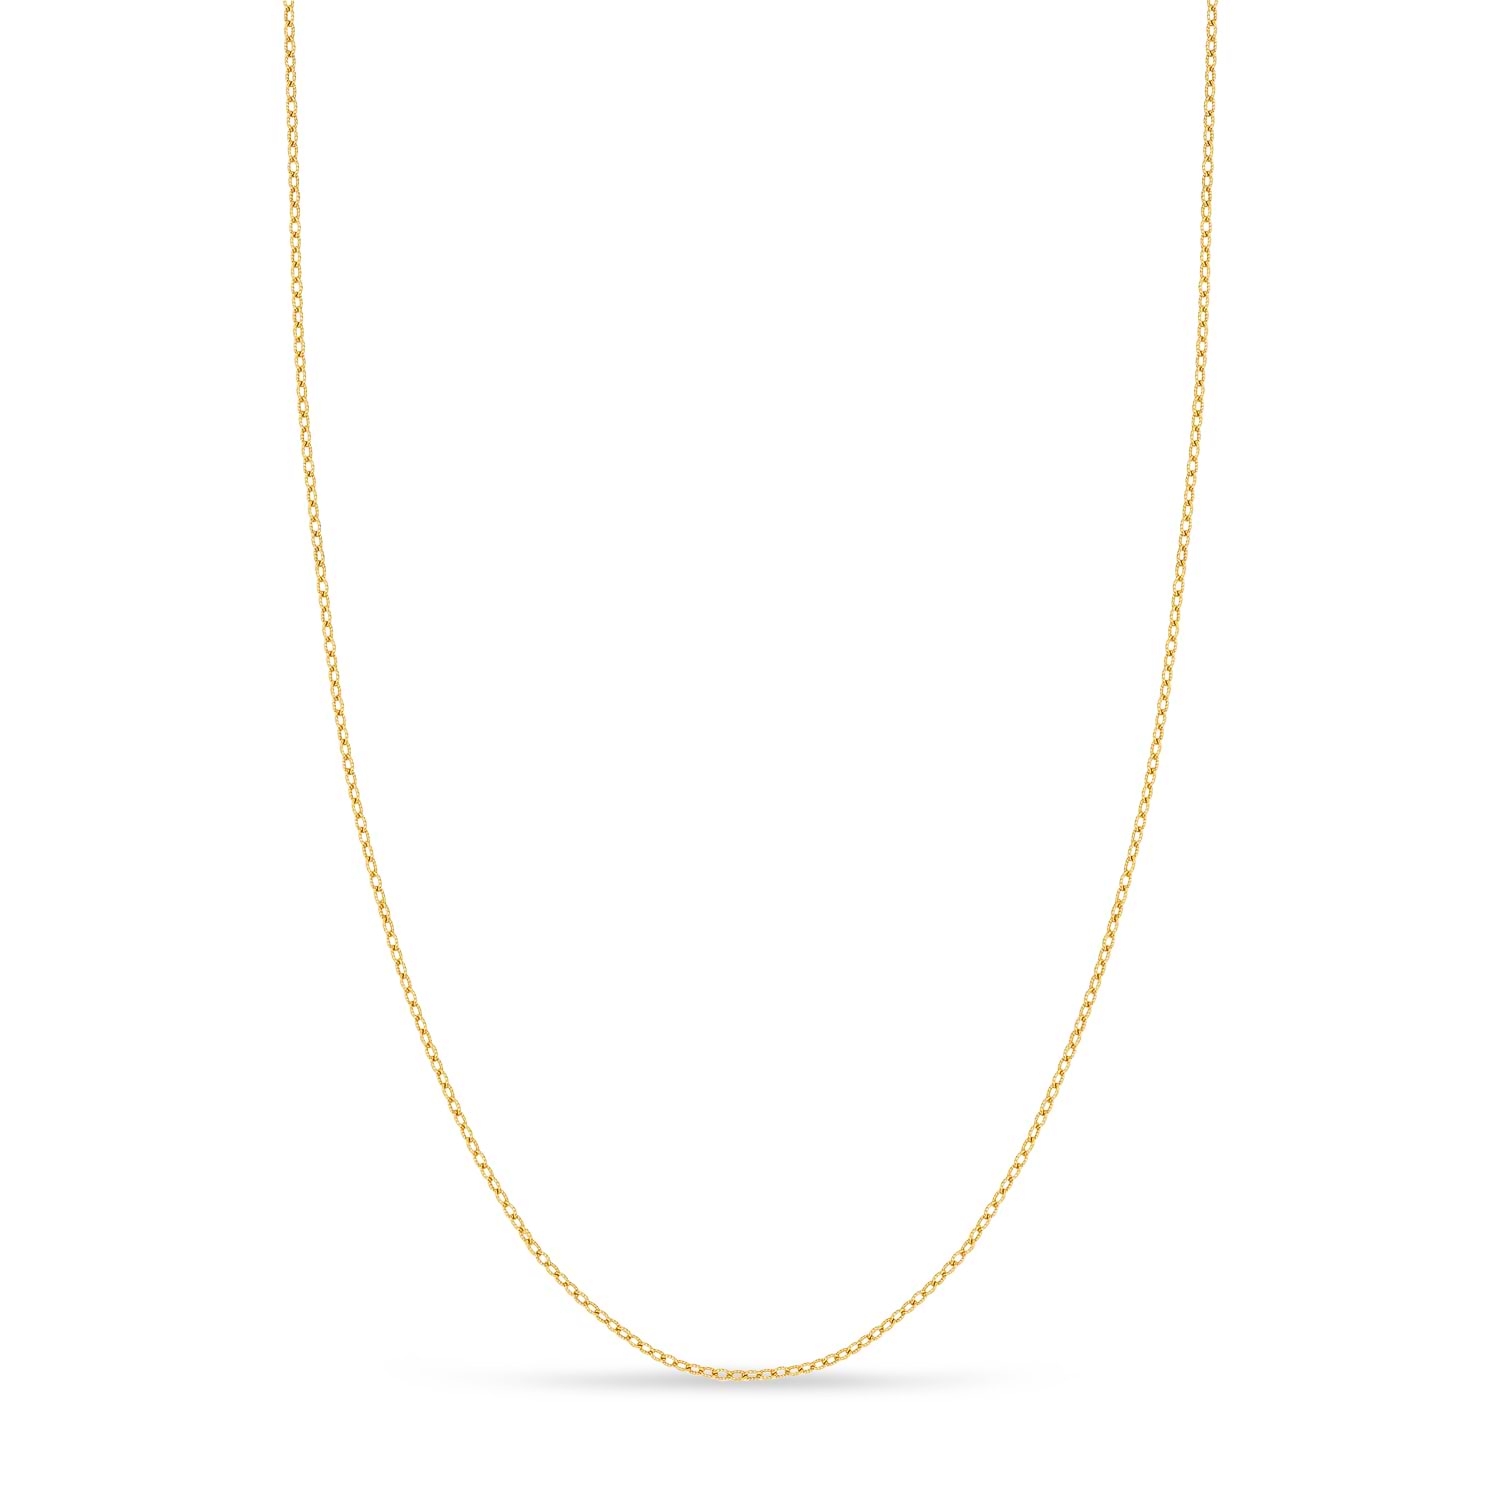 Designer Rolo Chain Necklace 14k Yellow Gold